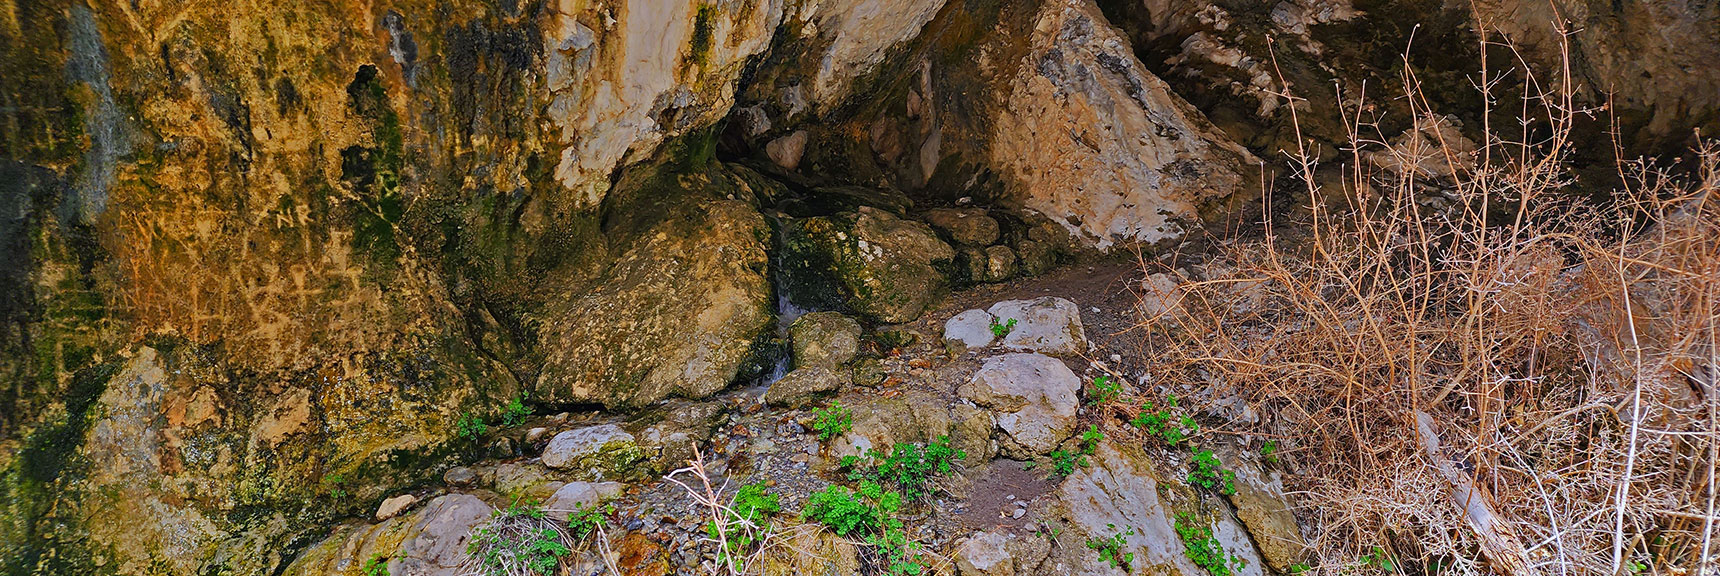 Water Emerging from Many Openings in the Porous Limestone | Fletcher Canyon Trail | Mt Charleston Wilderness | Spring Mountains, Nevada